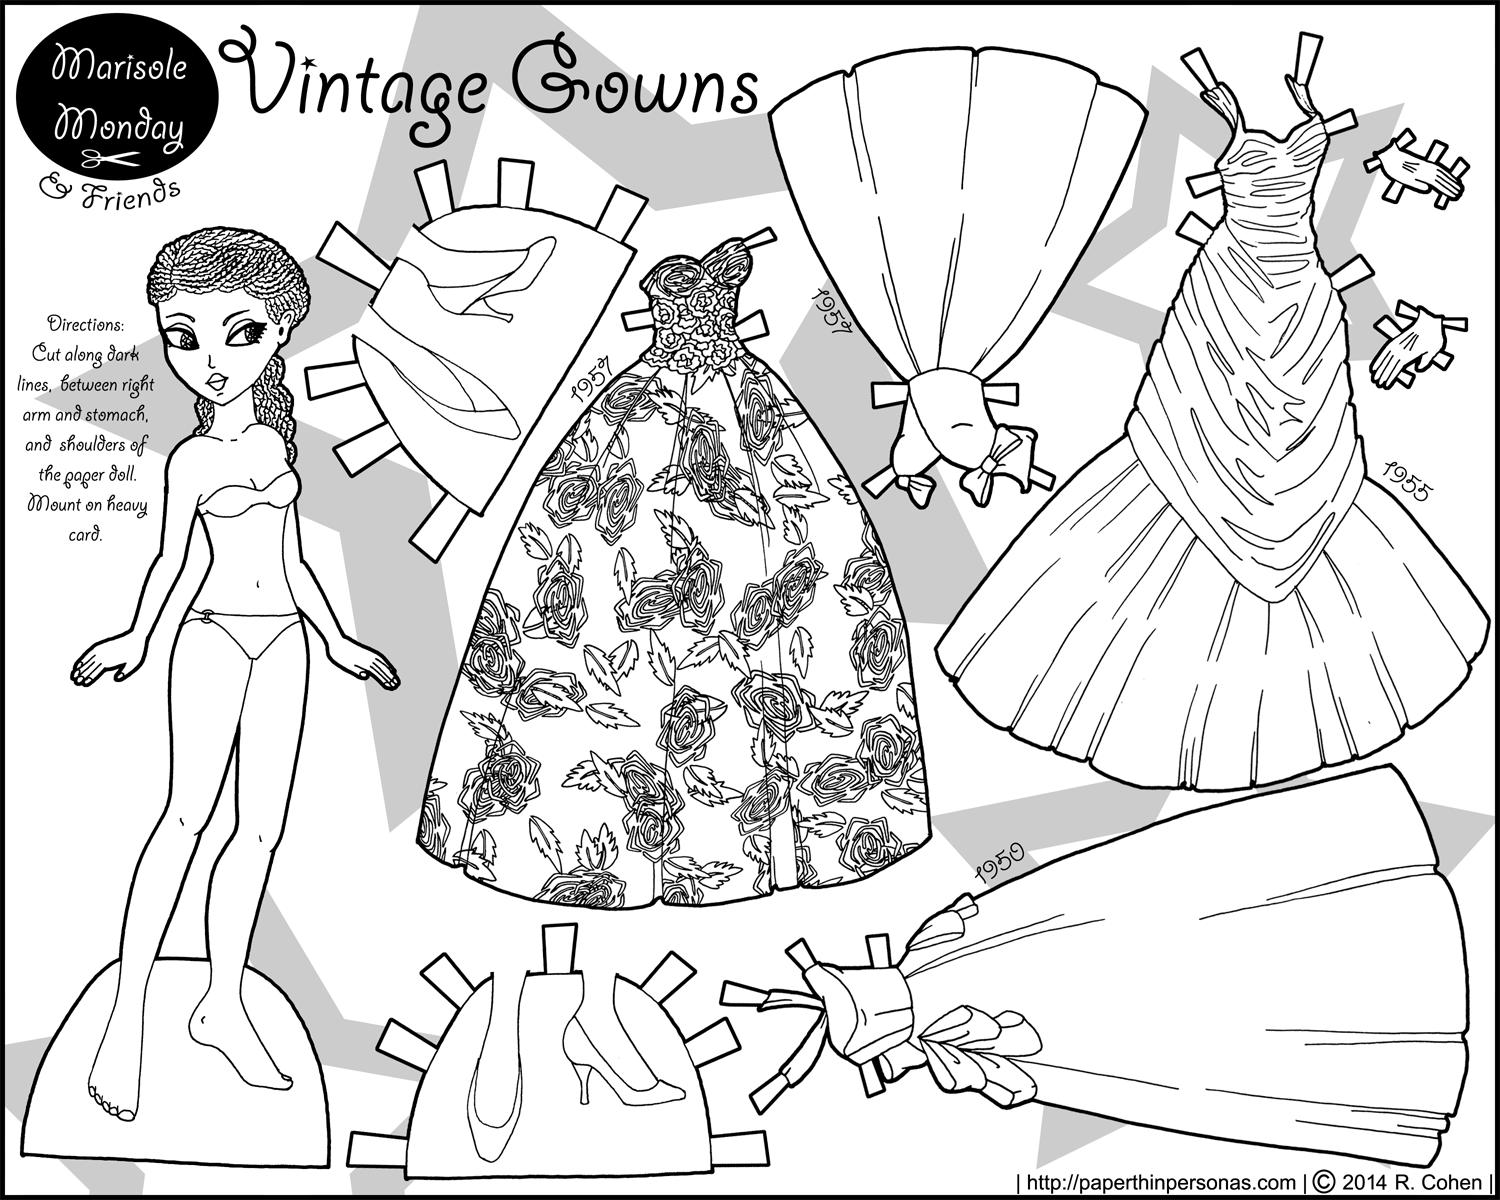 Vintage Gowns- 1950s Evening Gowns in Paper Doll Form ...